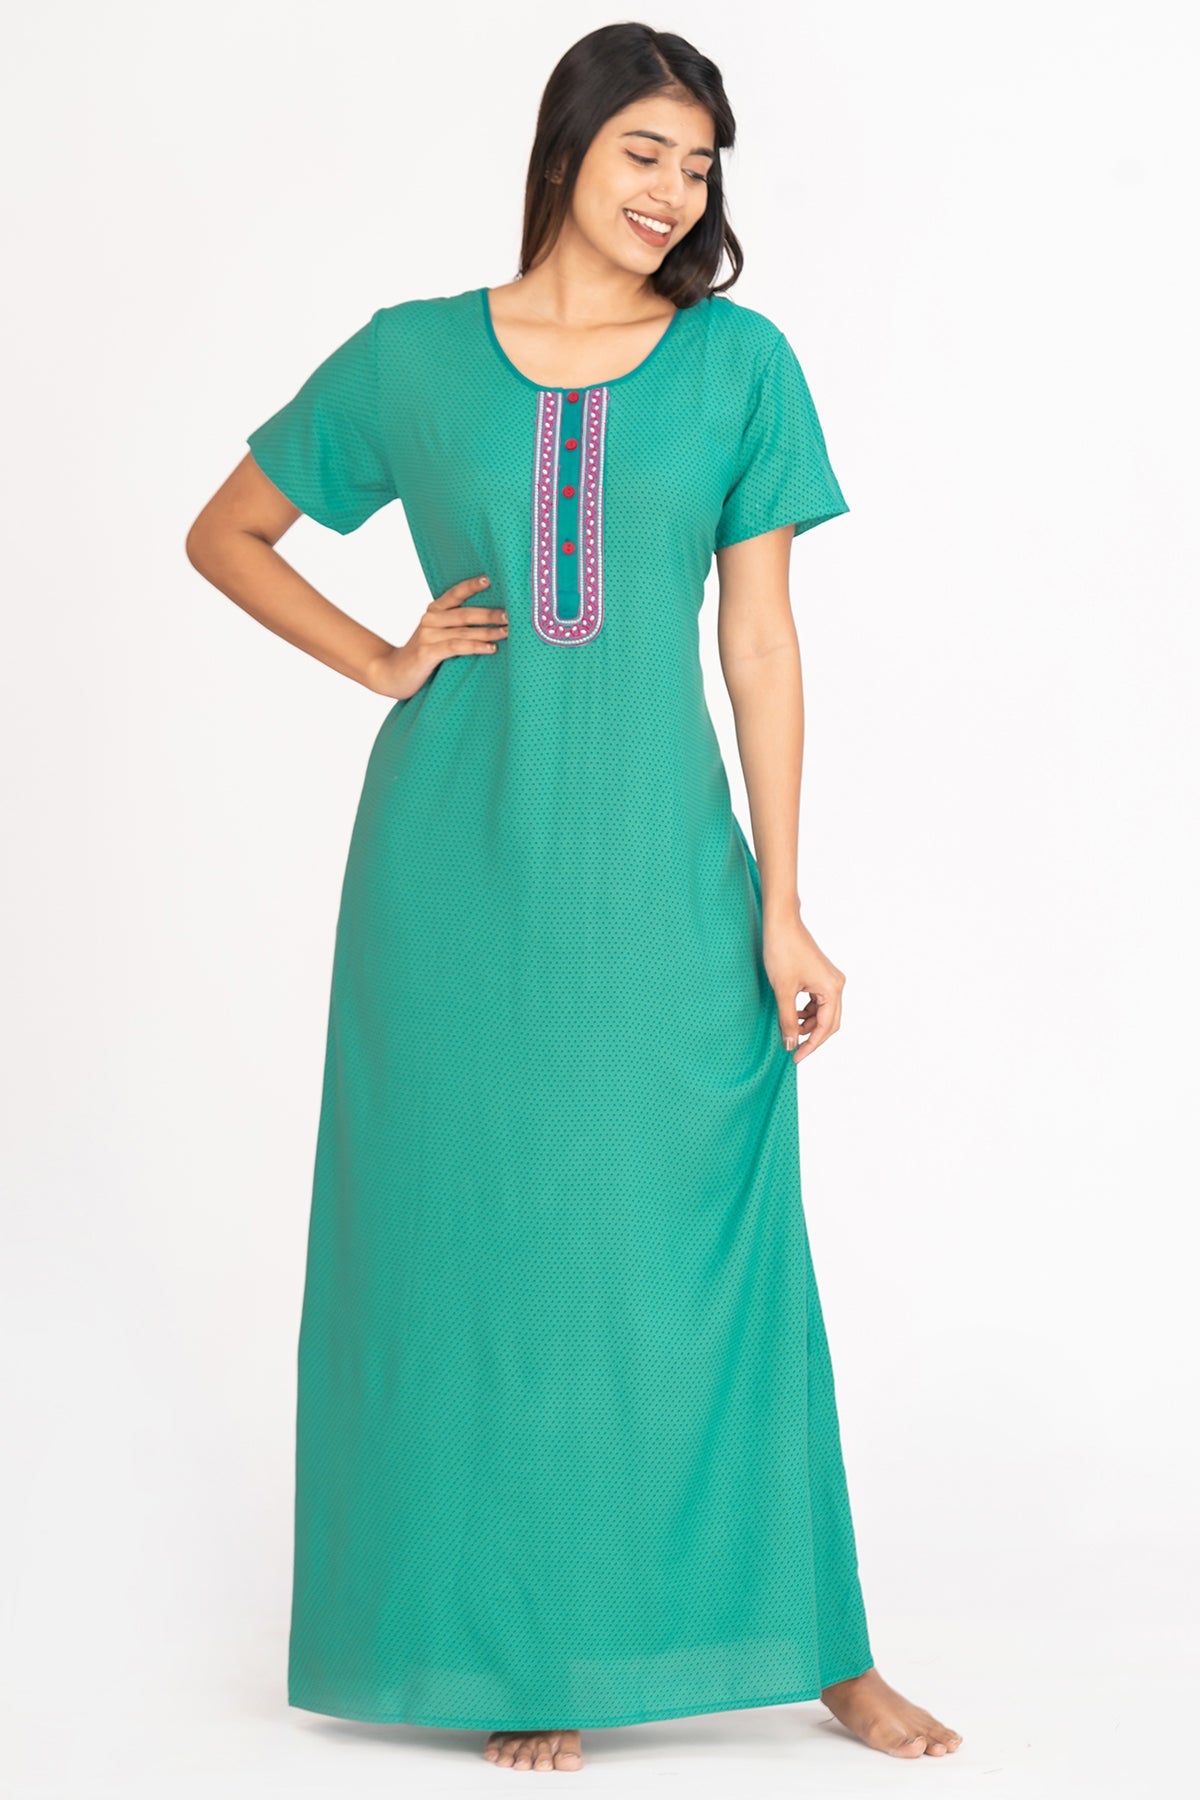 All Over Ditsy Polka Dot Printed With Embroidered Yoke Nighty - Green